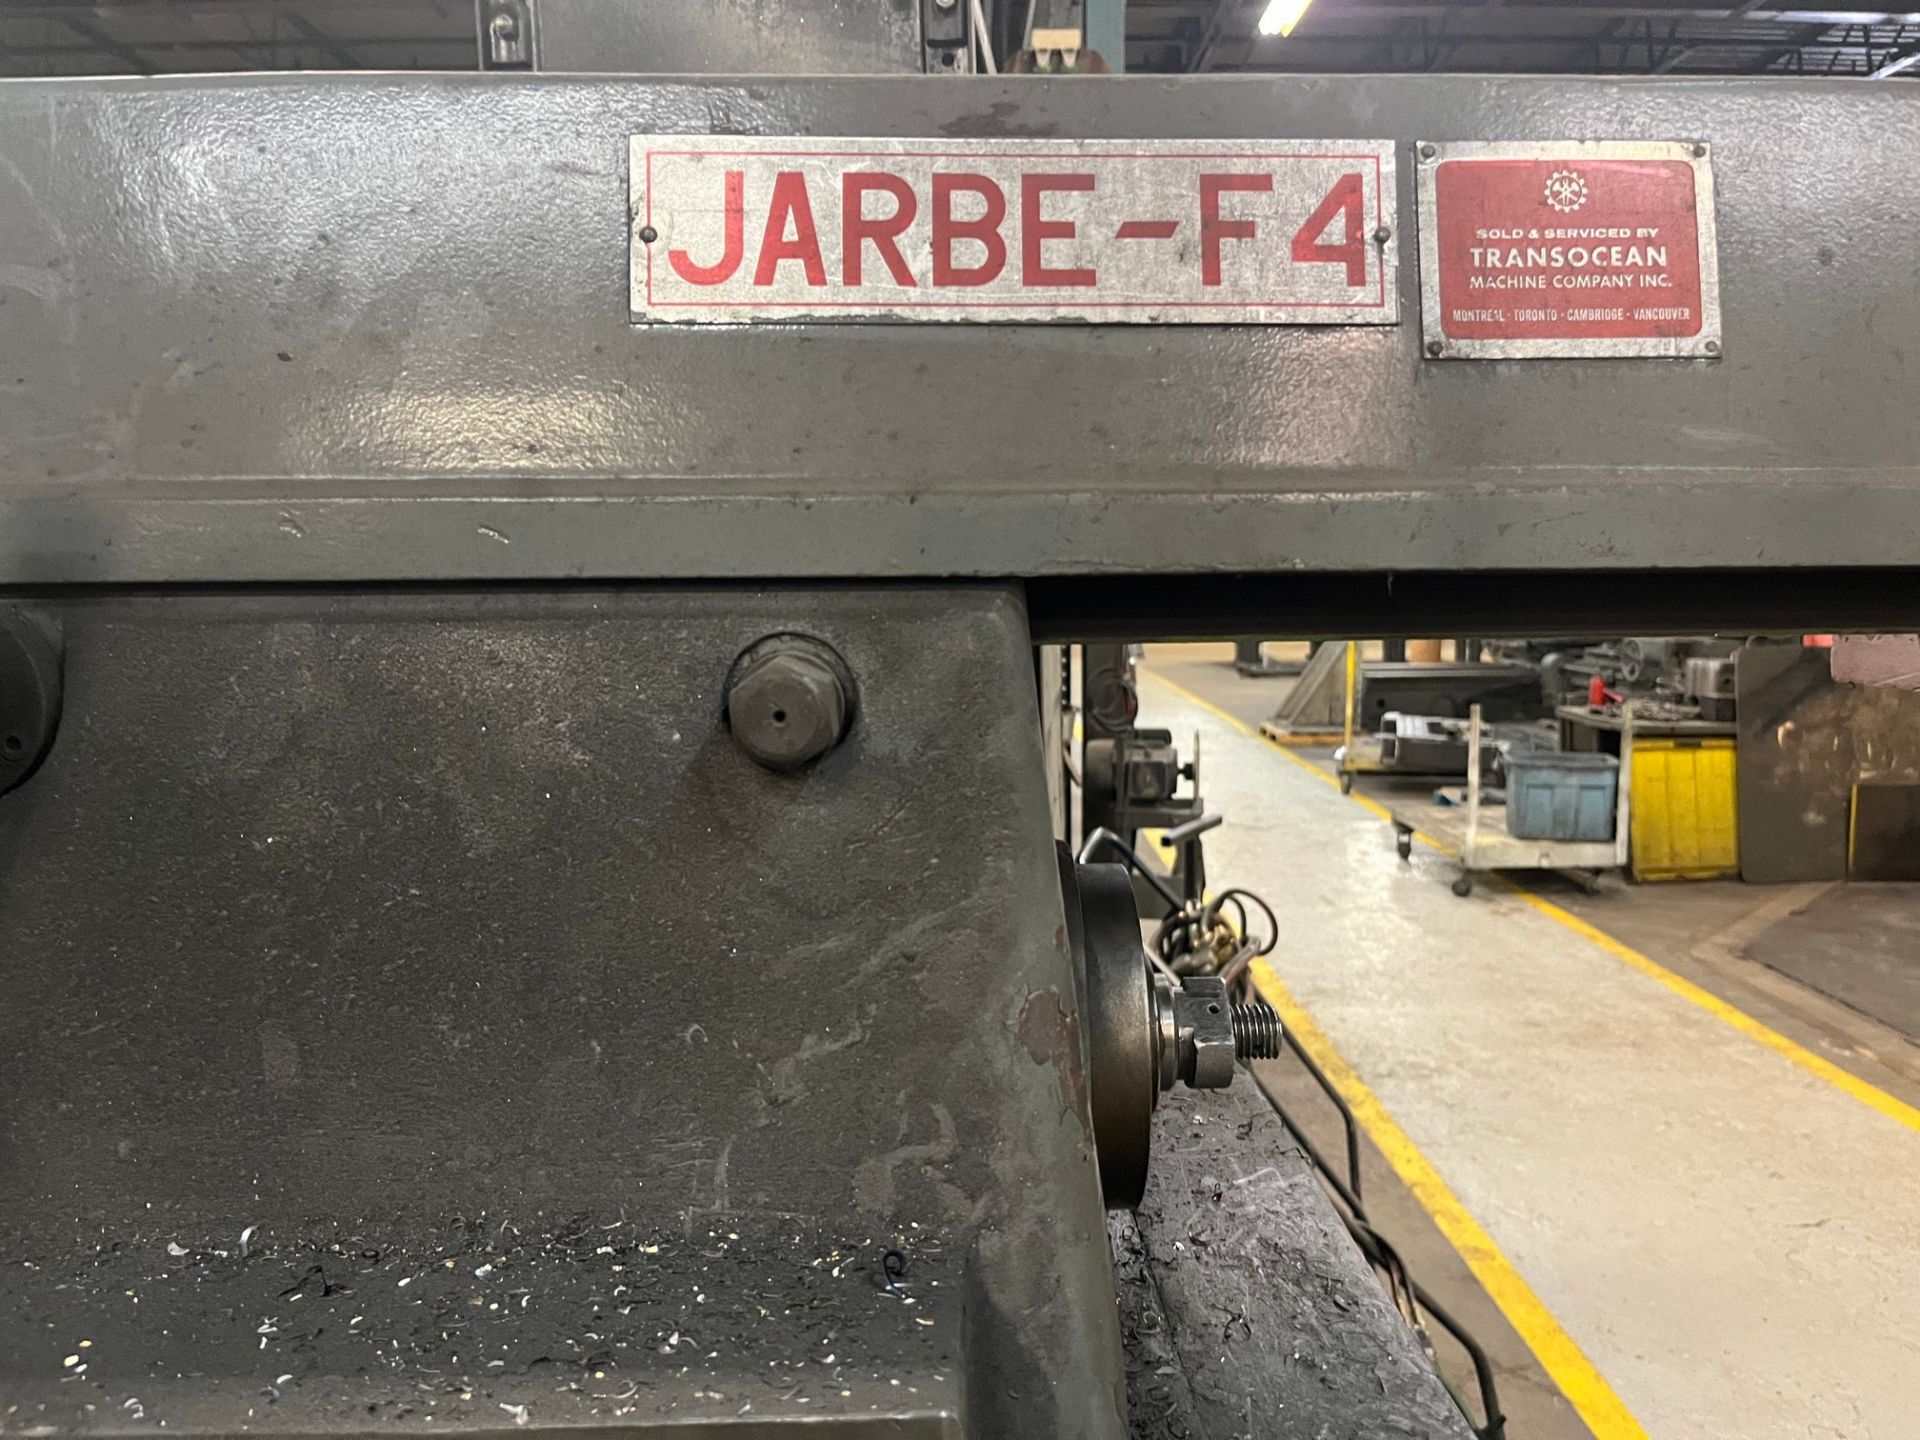 JARBE F4 UNIVERSAL MILLING MACHINE, 15” X 75” TABLE, 50 NMT SPINDLE, 36 – 1,800 RPM, S/N J-F4-24 - Image 4 of 4